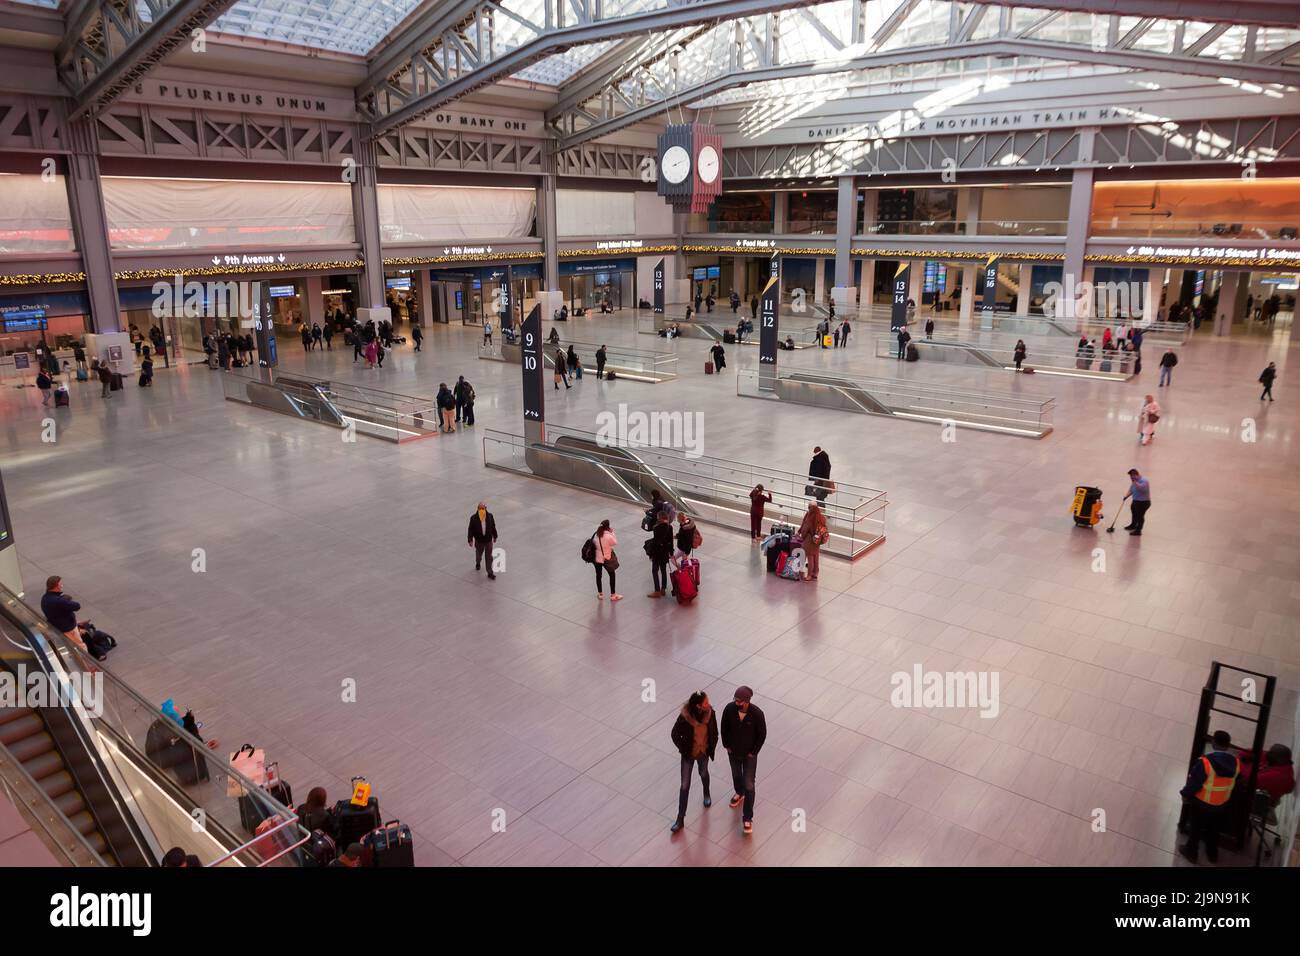 Moynihan Train Hall, an expansion of Penn Station in the former James A. Farley Post Office Building, has access to the Long Island Railroad & Amtrak. Stock Photo